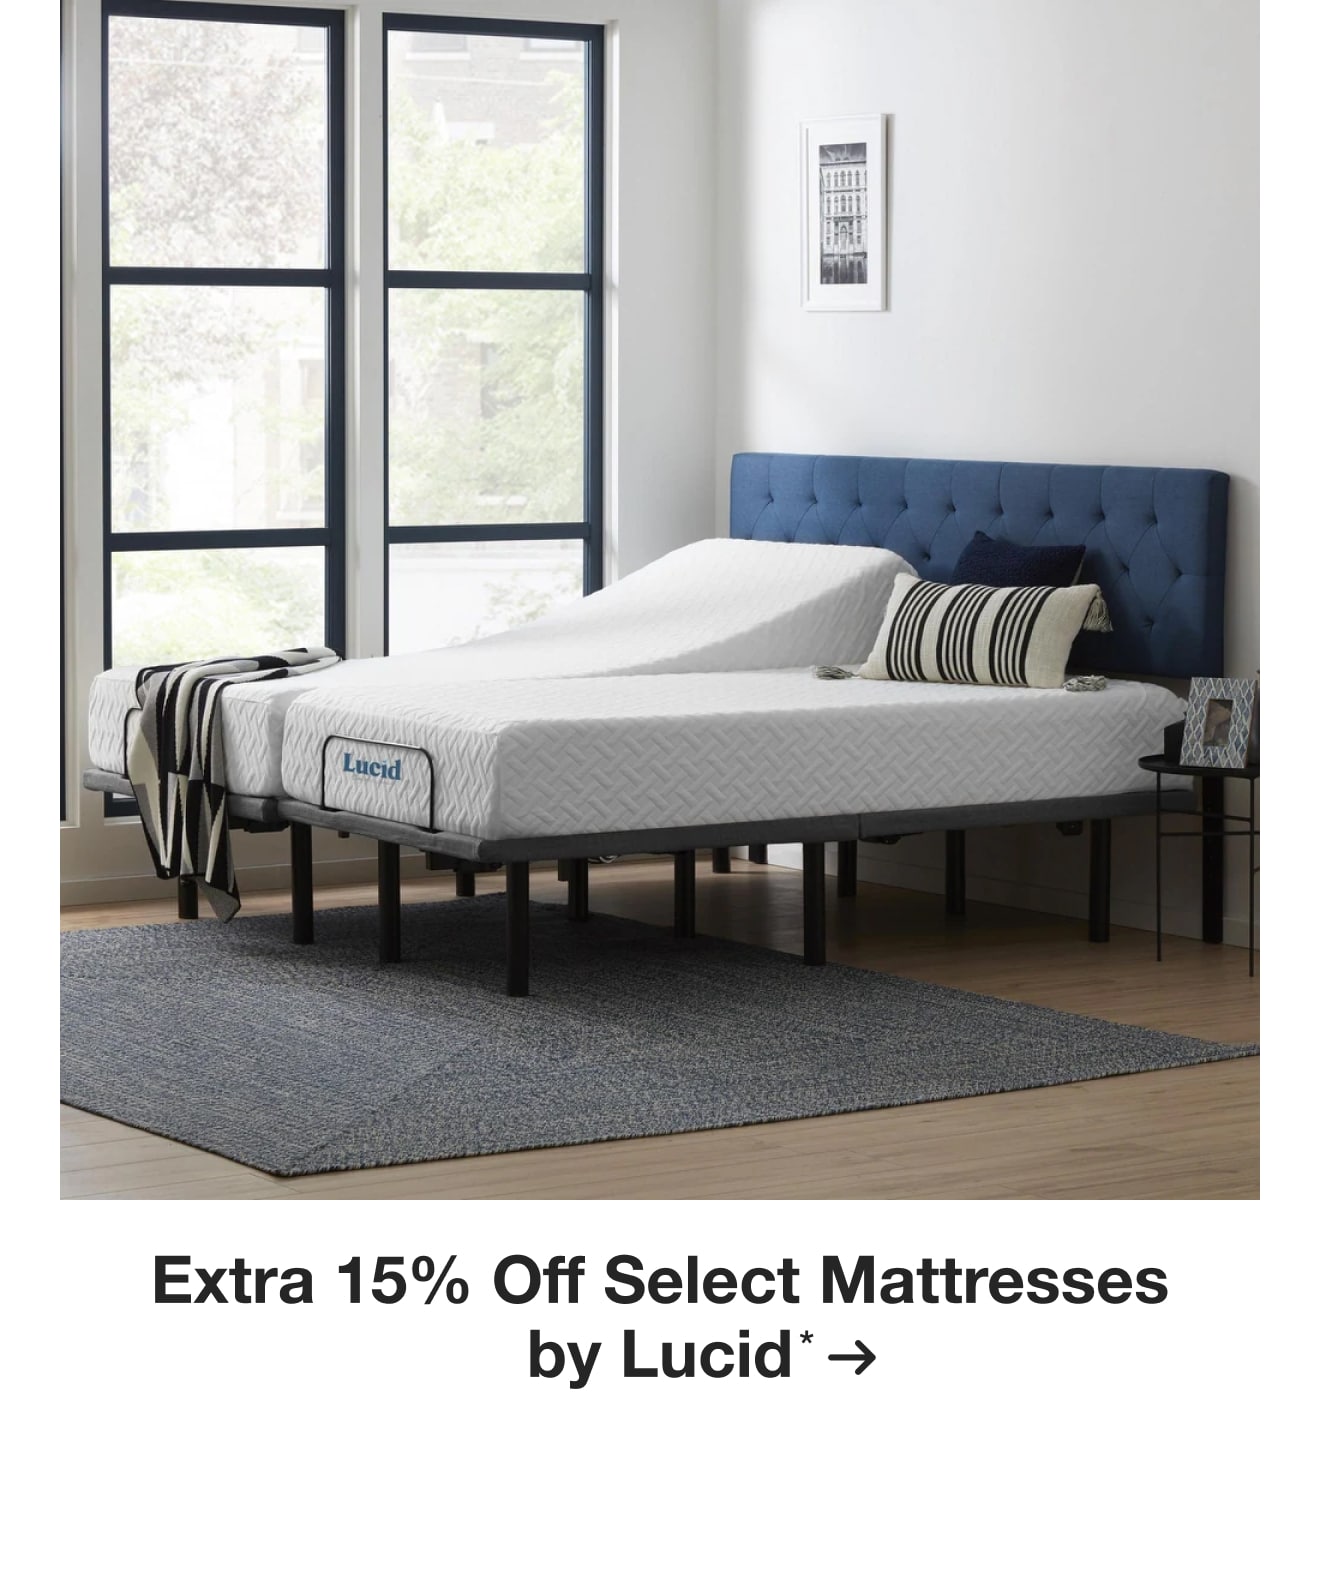 Extra 15% off Select Mattresses by Lucid*